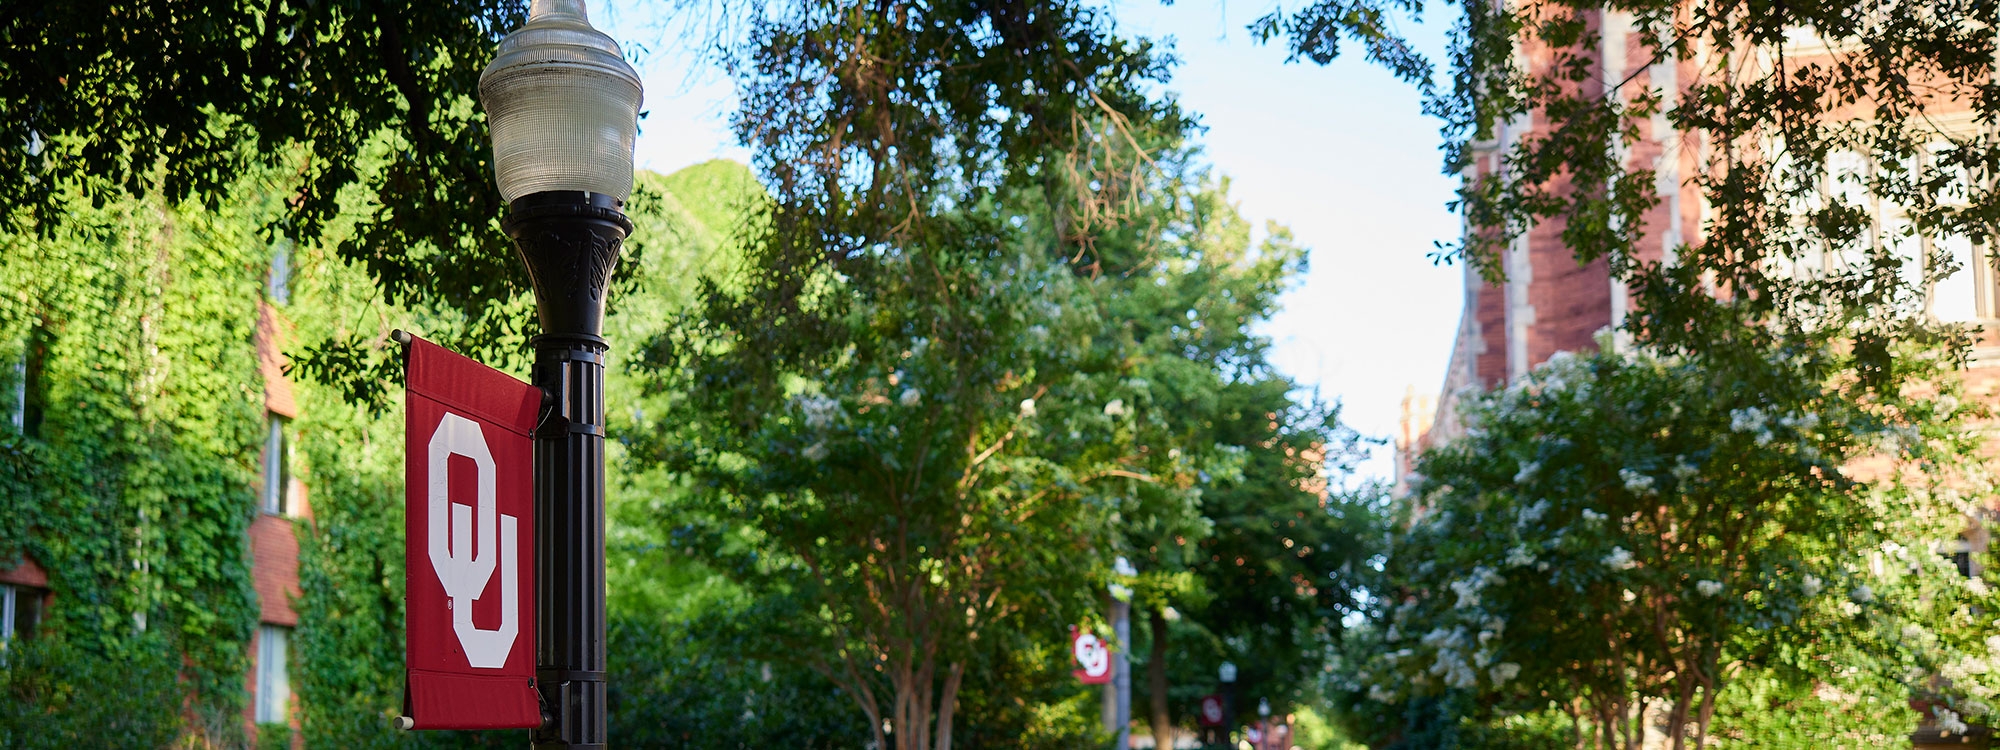 A lamppost with an OU flag in the foreground, surrounded by greenery and buildings in the background.